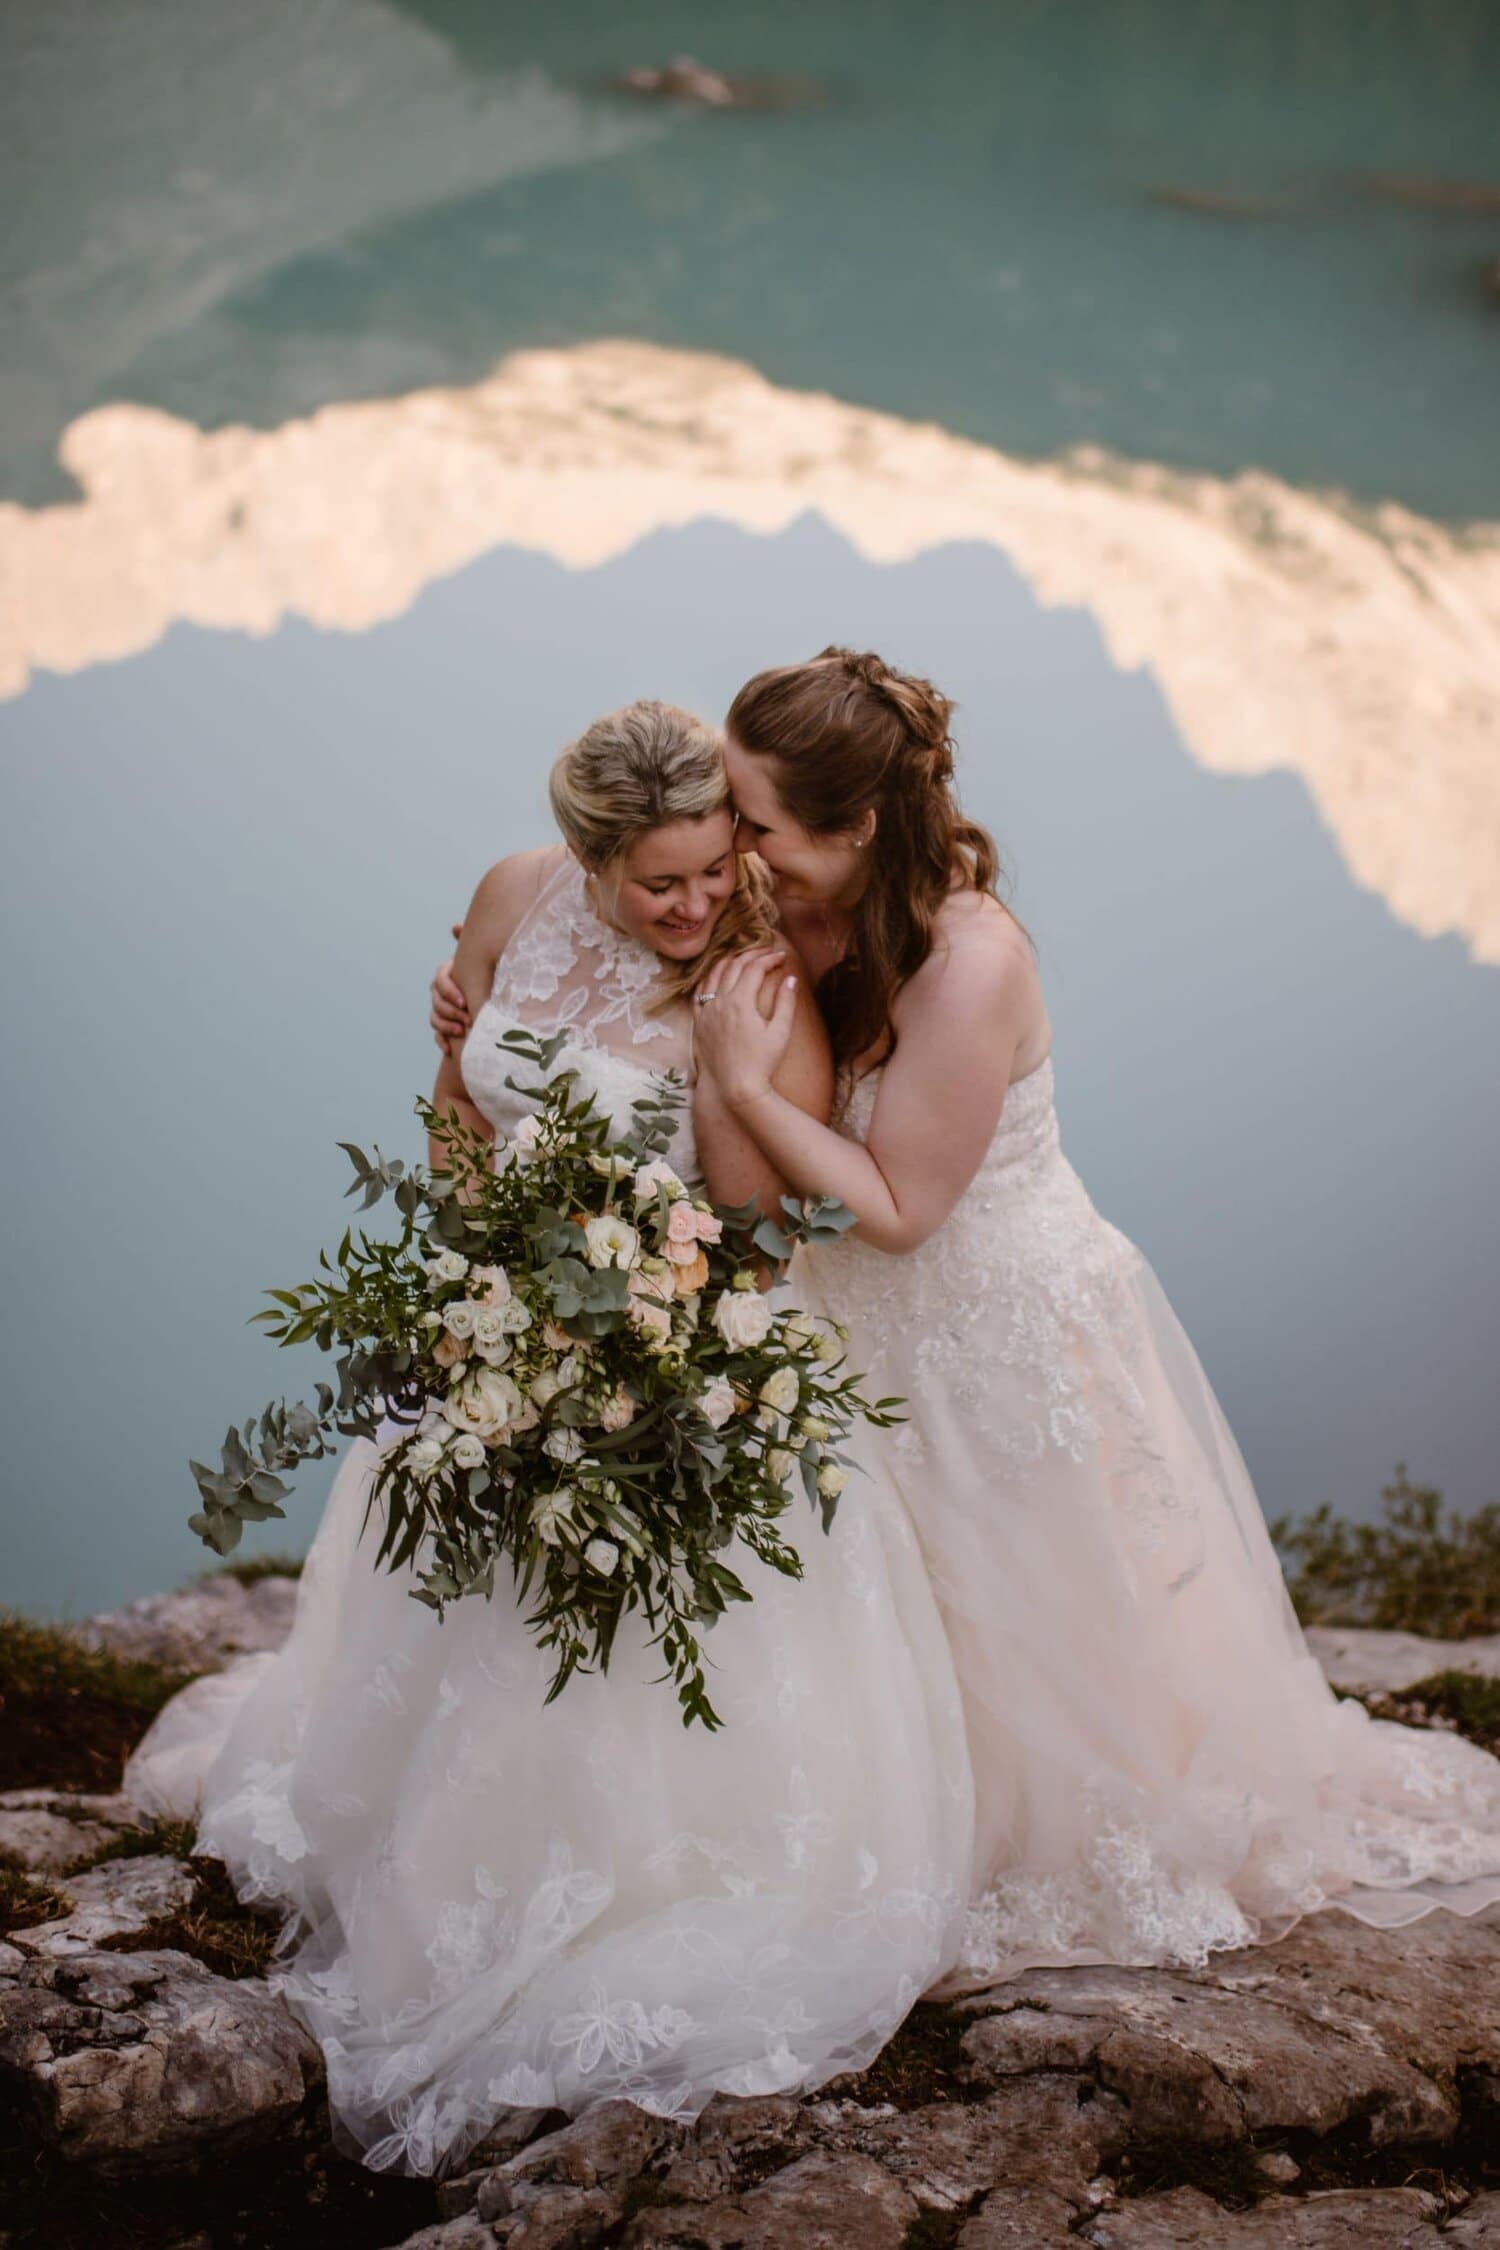 Two brides embrace and smile at each other in front of a lake.